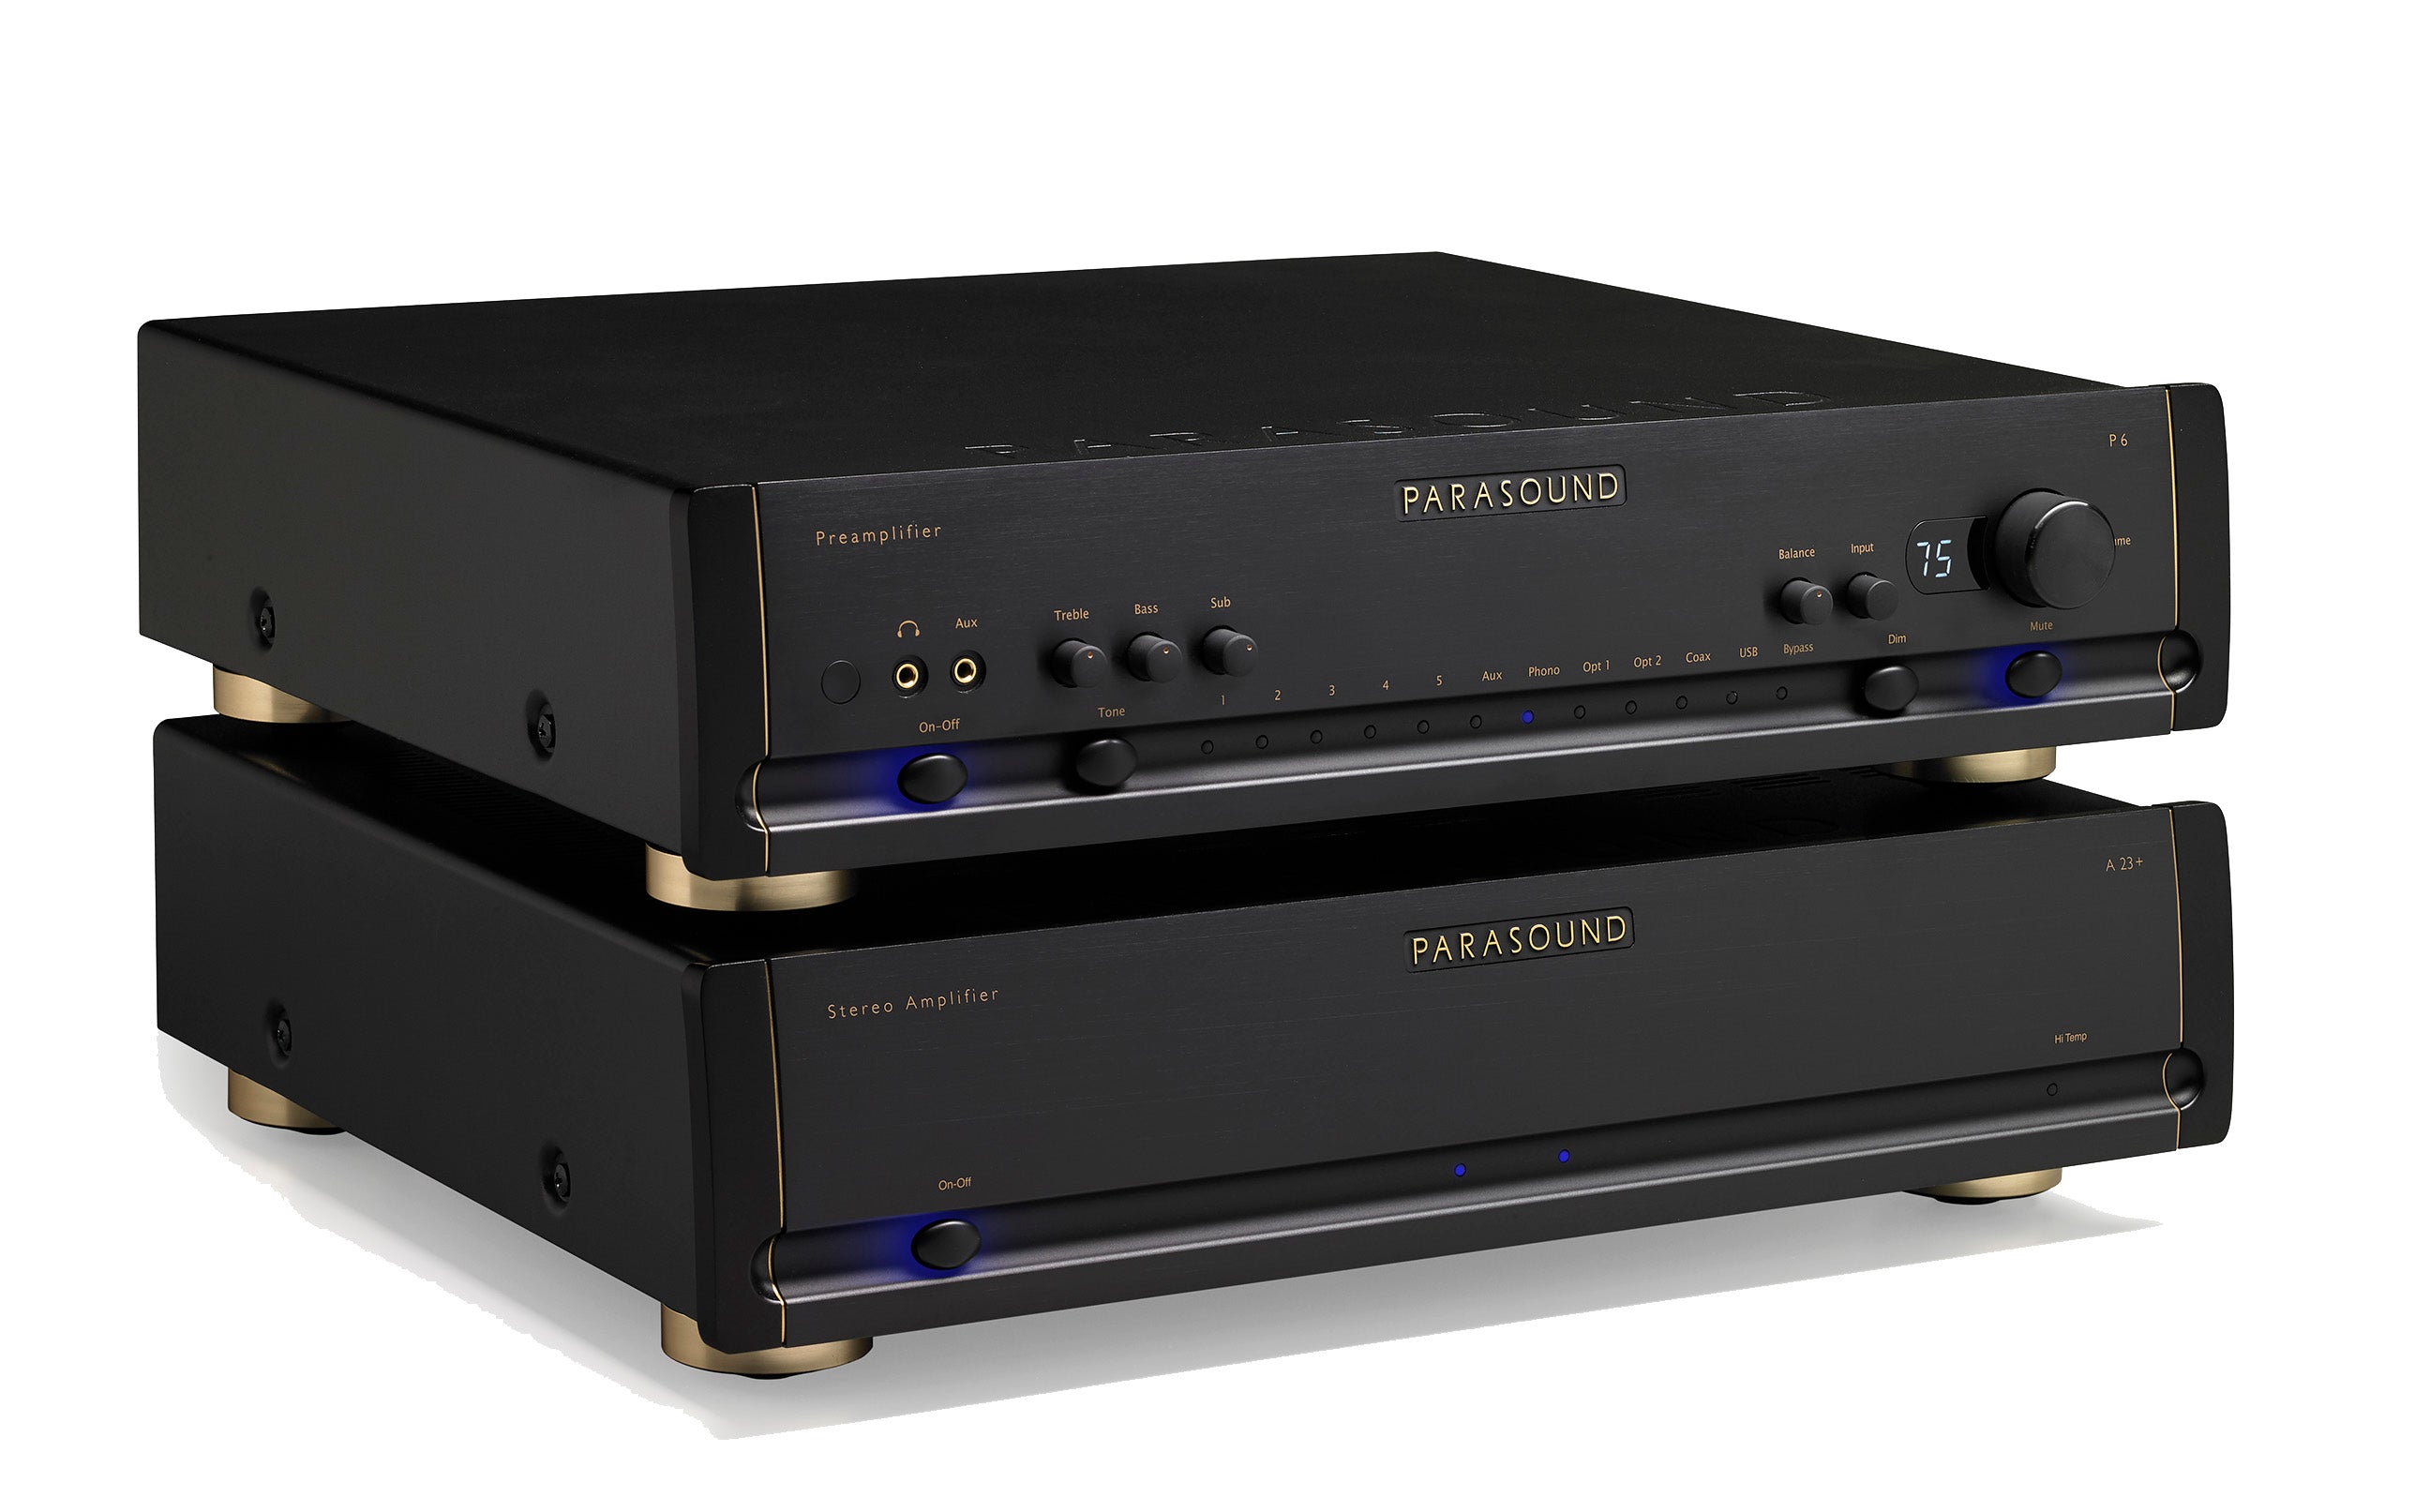 Parasound HALO A21 Plus Stereo Power Amplifier - The Audio Experts